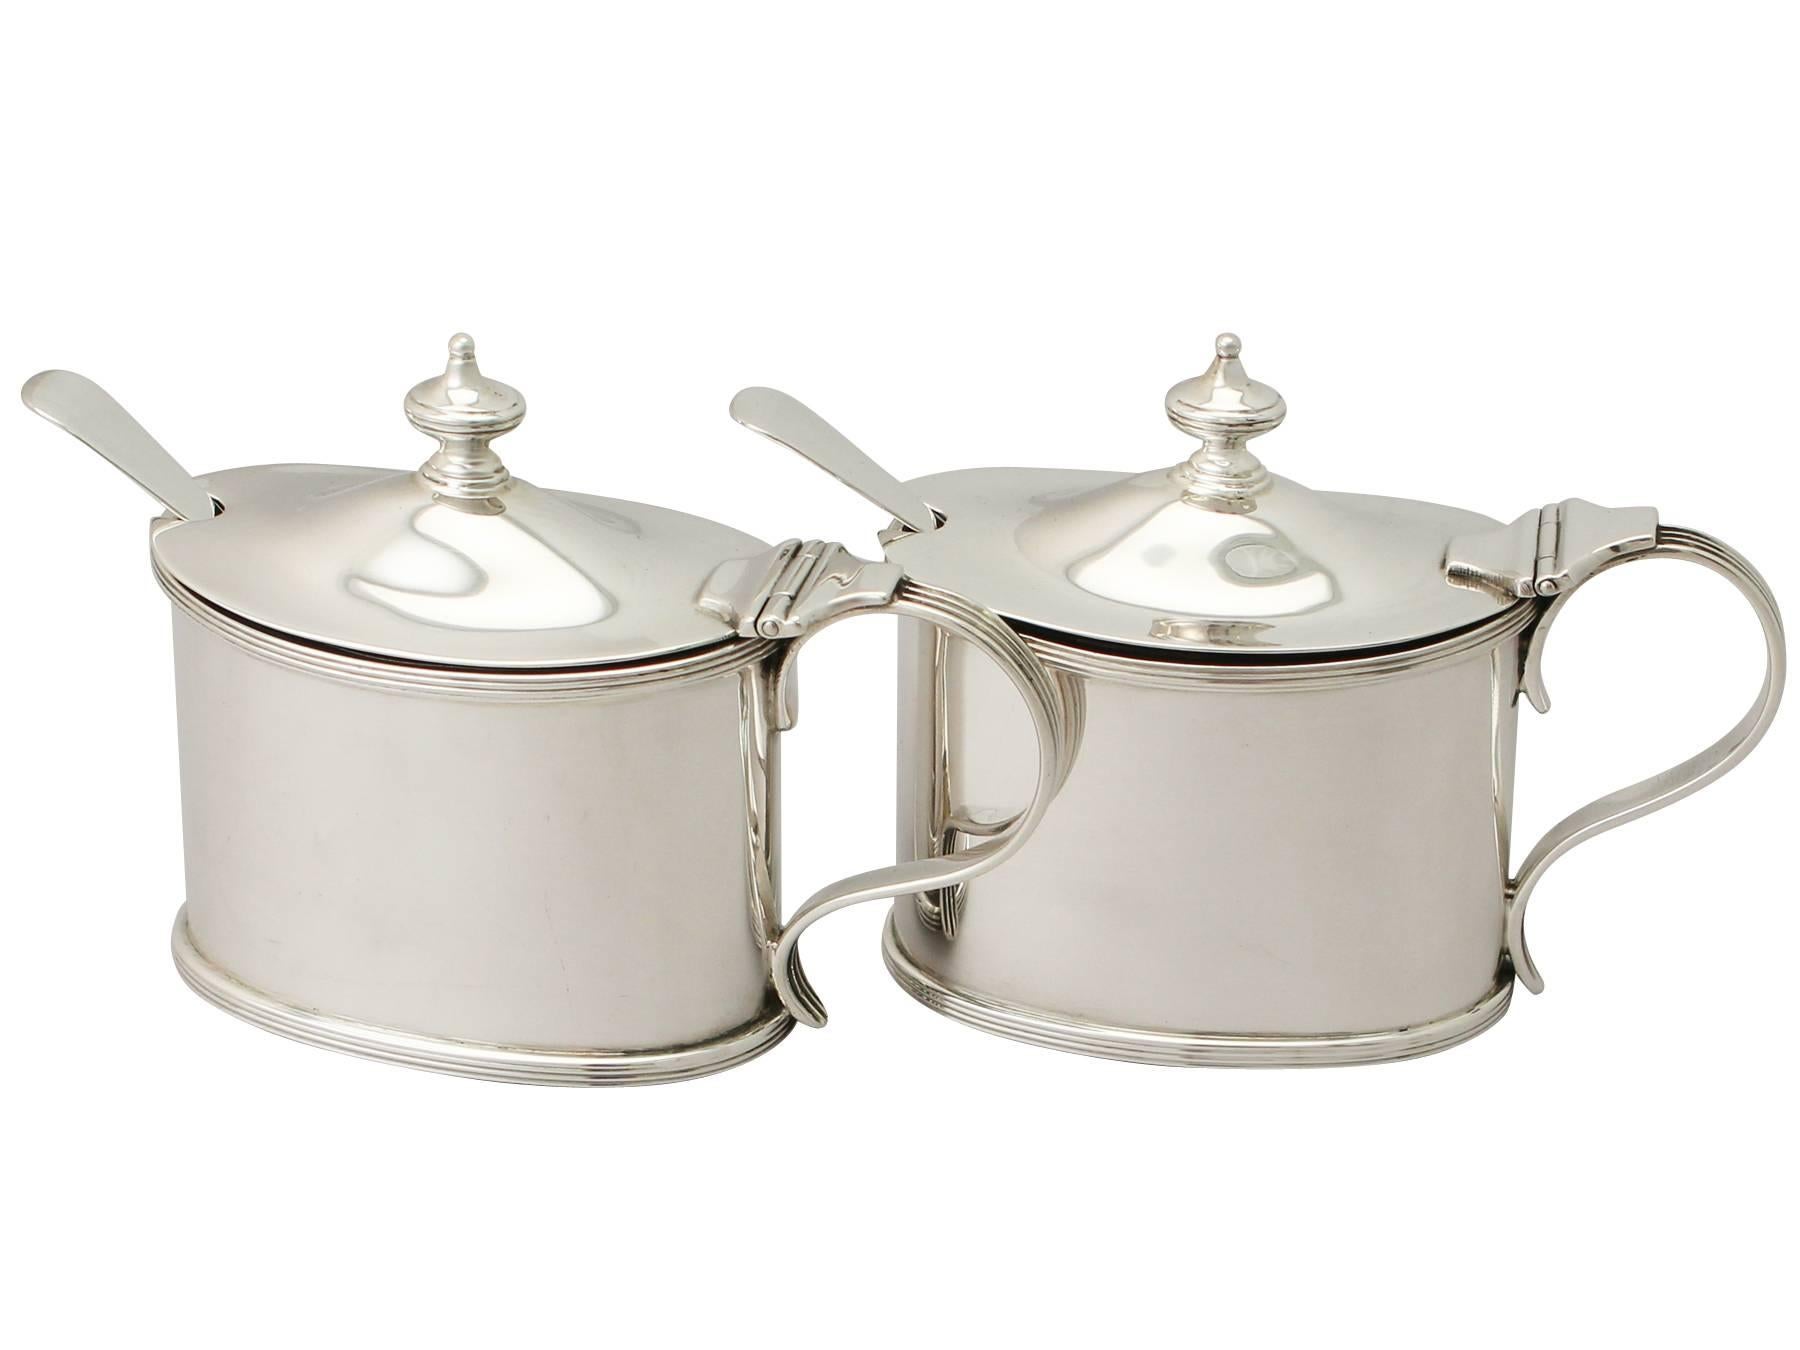 An exceptional, fine and impressive pair of antique George V English sterling silver mustard pots; an addition to our silver cruet and condiments collection.

These fine antique George V sterling silver mustard pots have a plain oval form.

The